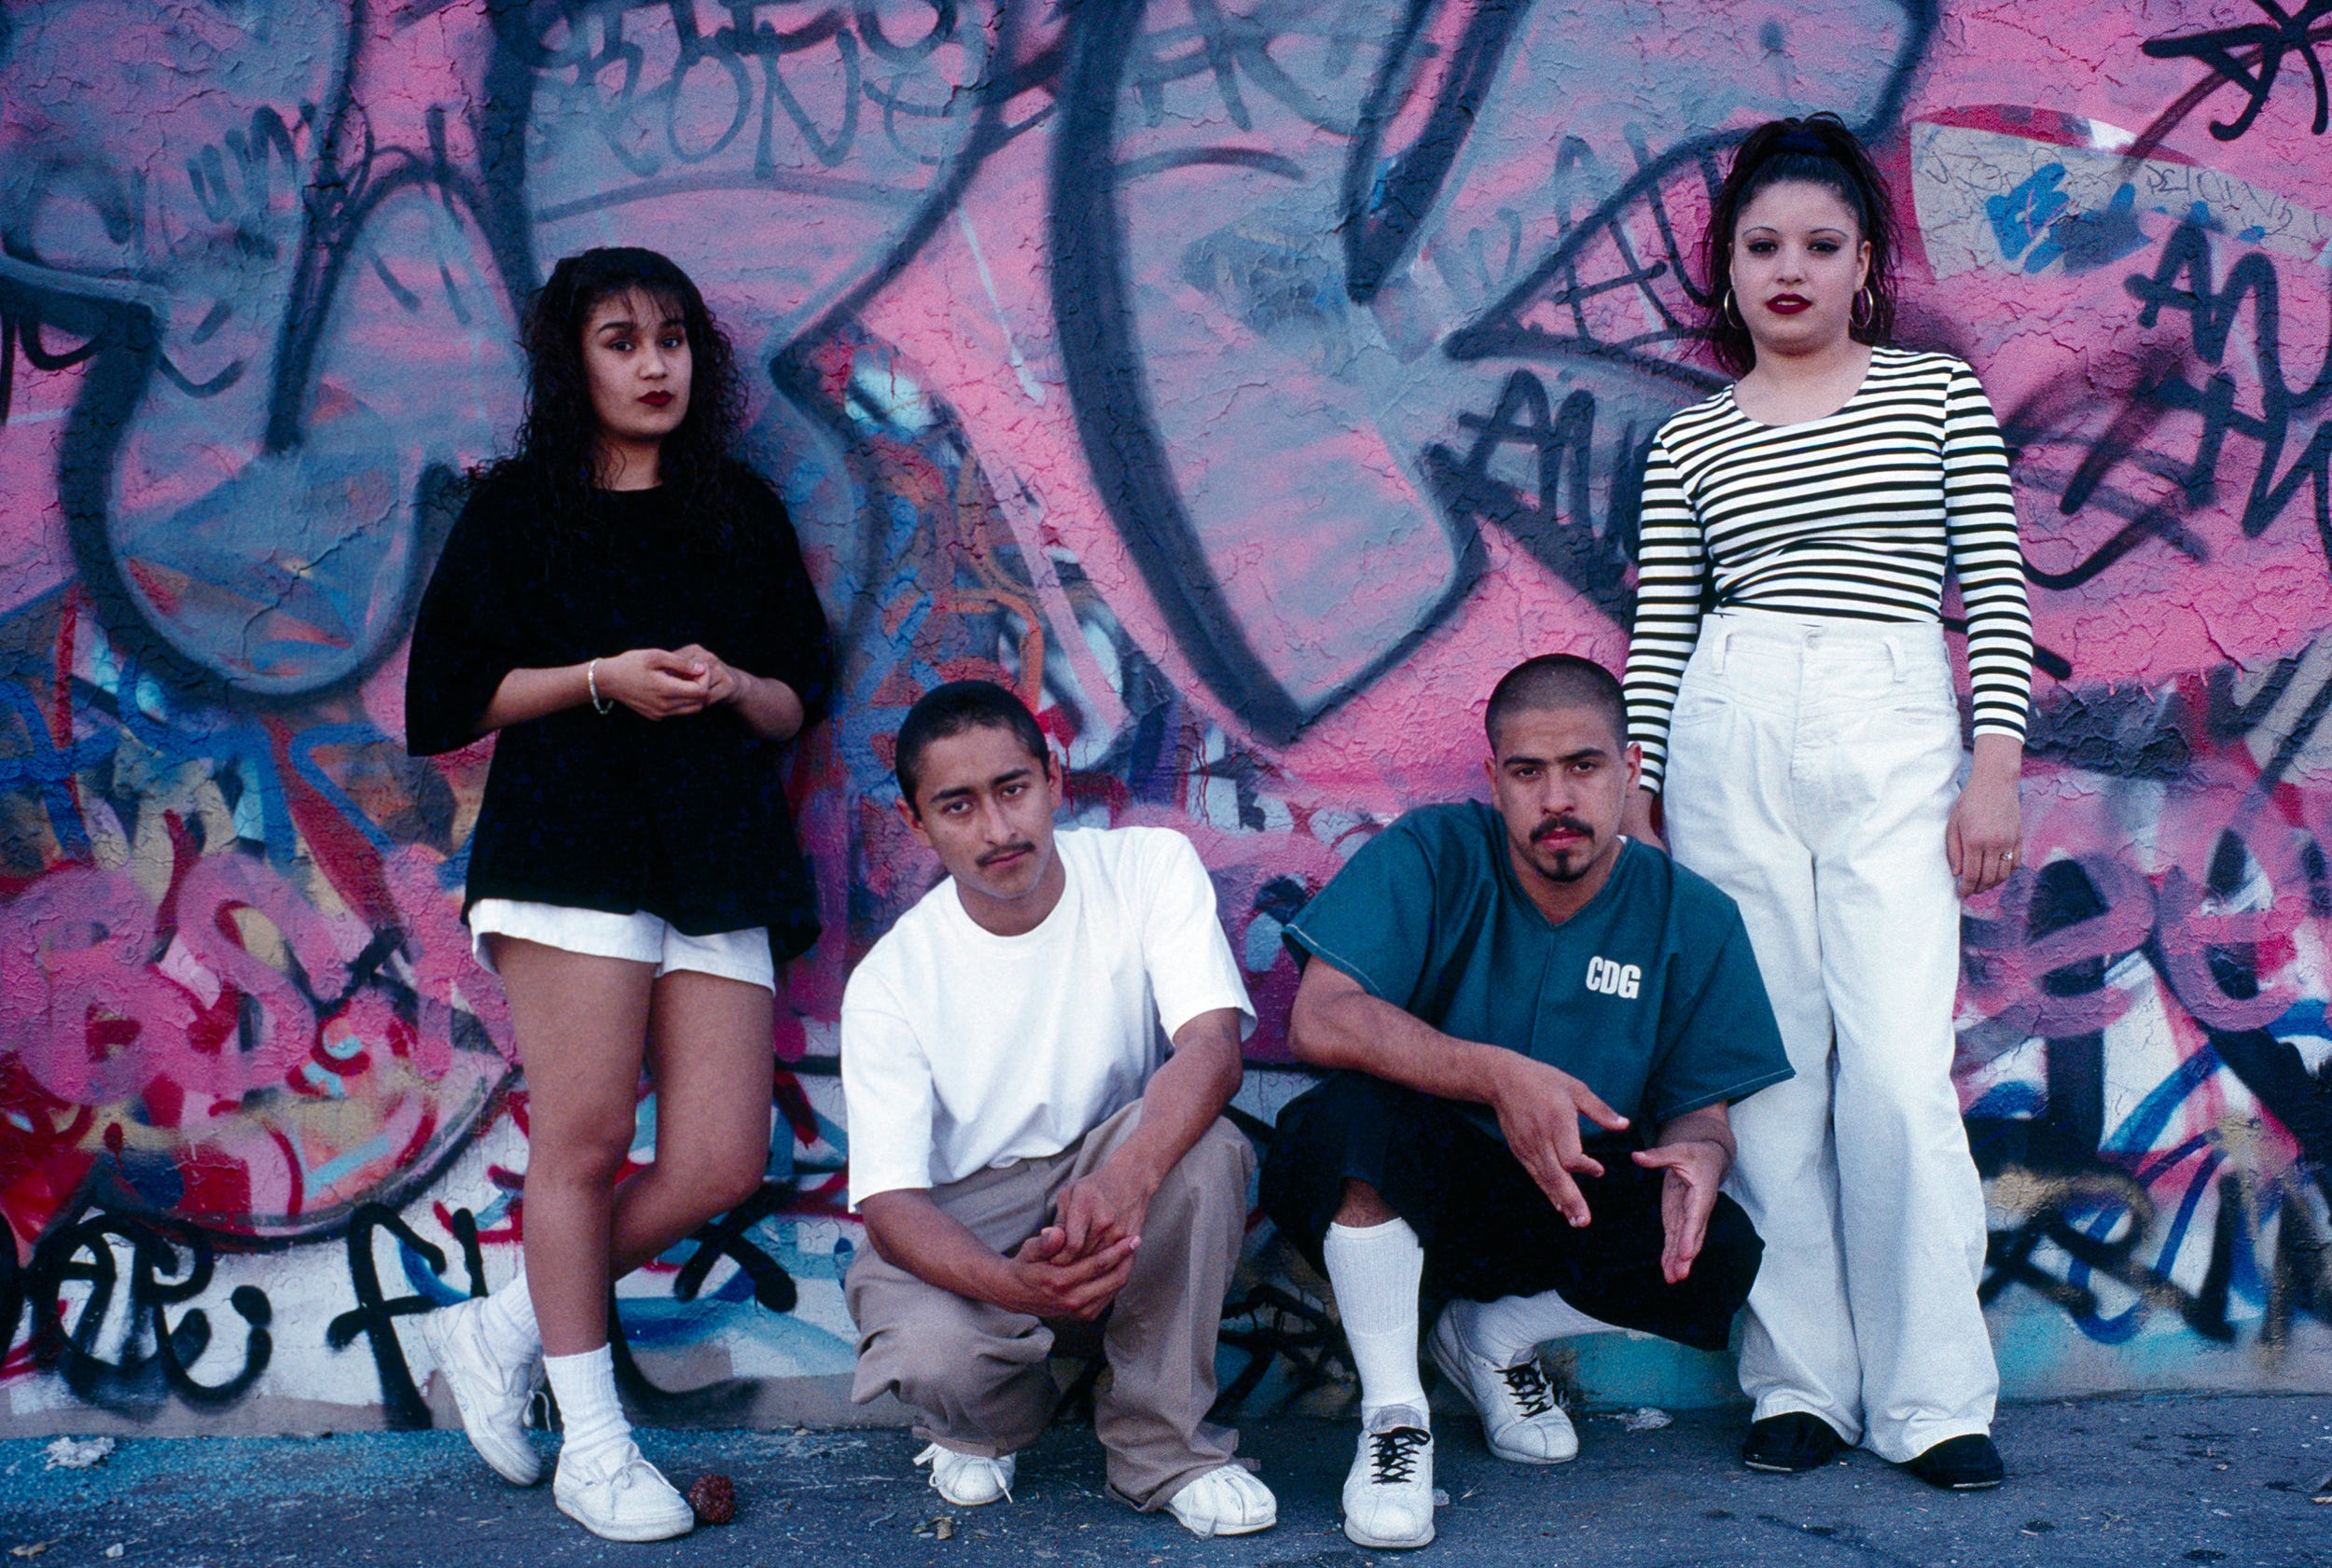 Photos The Vida Loca Of East La Teen Gang Culture In The 90s By 2119